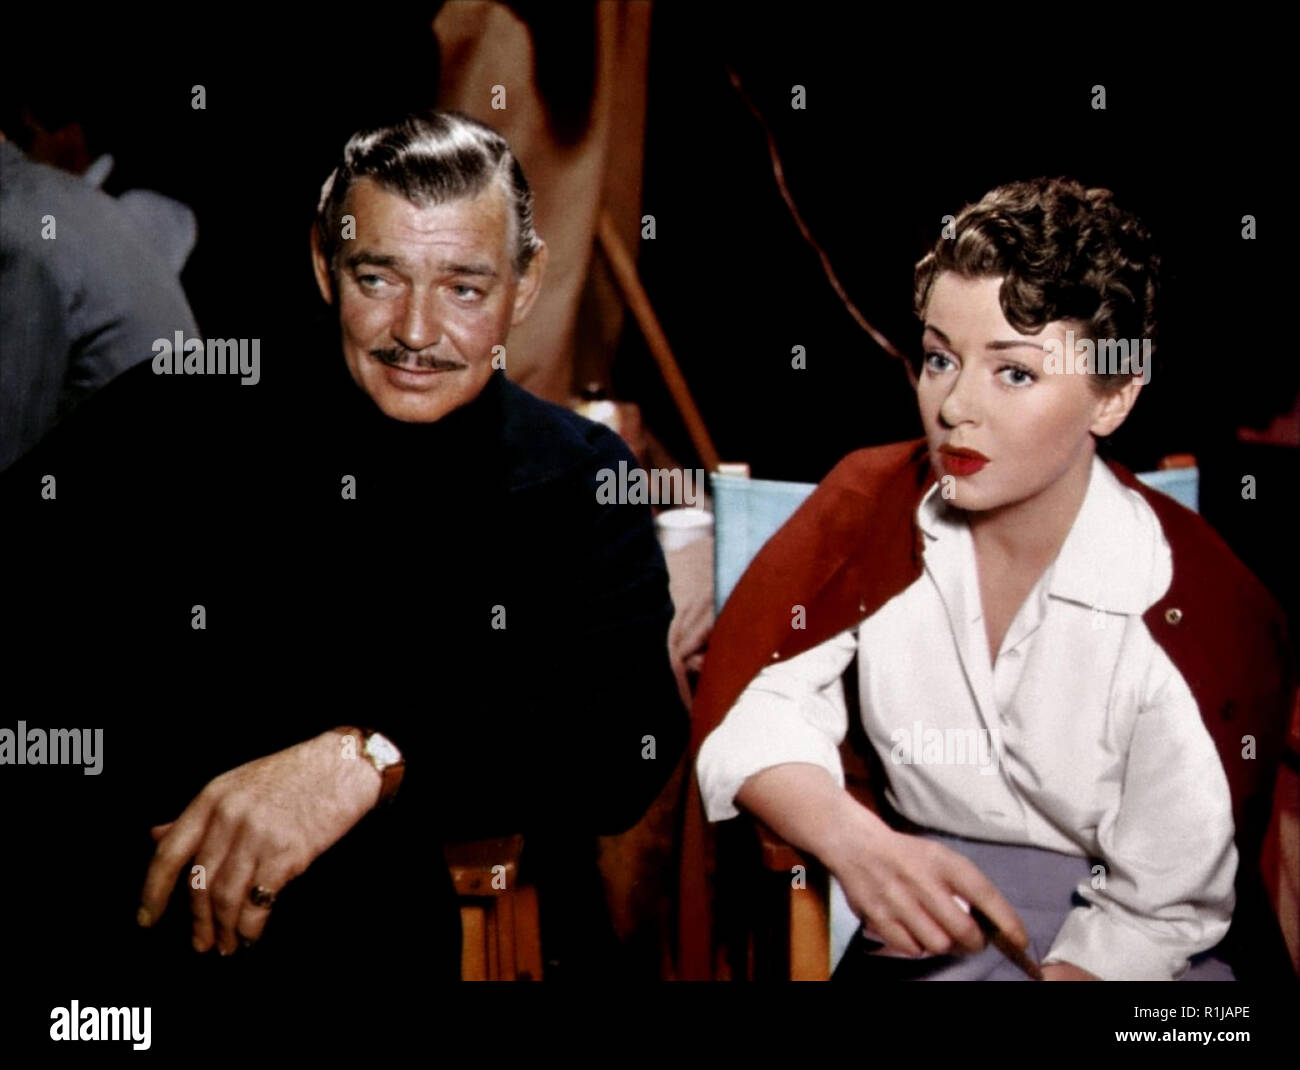 2016/01/31 23:08:02Gable, Clark (Betrayed) 014,773 KB Scanned, restored and colorized by Colin Credit: Hollywood Photo Archive / MediaPunch Stock Photo